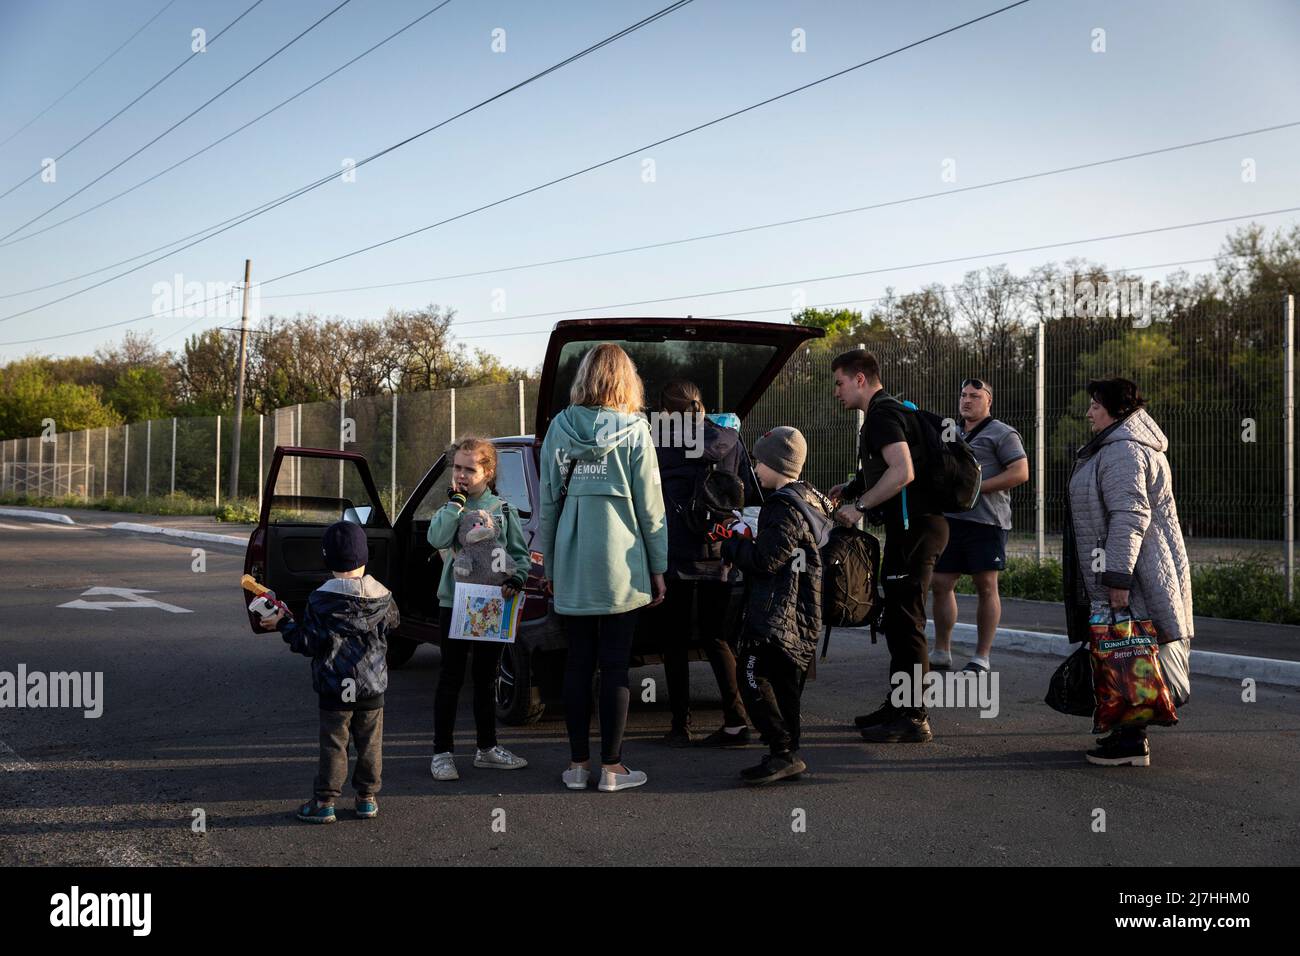 Sophia (L1, 7), Igor (L3, 8) Sergei (L4, 2.5) pack their belongings in the car with their parents as they depart to other cities after arriving in Zaporizhia from Kherson. Amid the intensified war crisis in Southeast Ukraine, millions of Ukrainian families have now been evacuated from the war zones and Russia controlled territories to Ukraine controlled territories, Zaporizhia.According to the United Nations, more than 11 million people are believed to have fled their homes in Ukraine since the conflict began, with 7.7 million people displaced inside their homeland. (Photo by Alex Chan Tsz Yuk Stock Photo